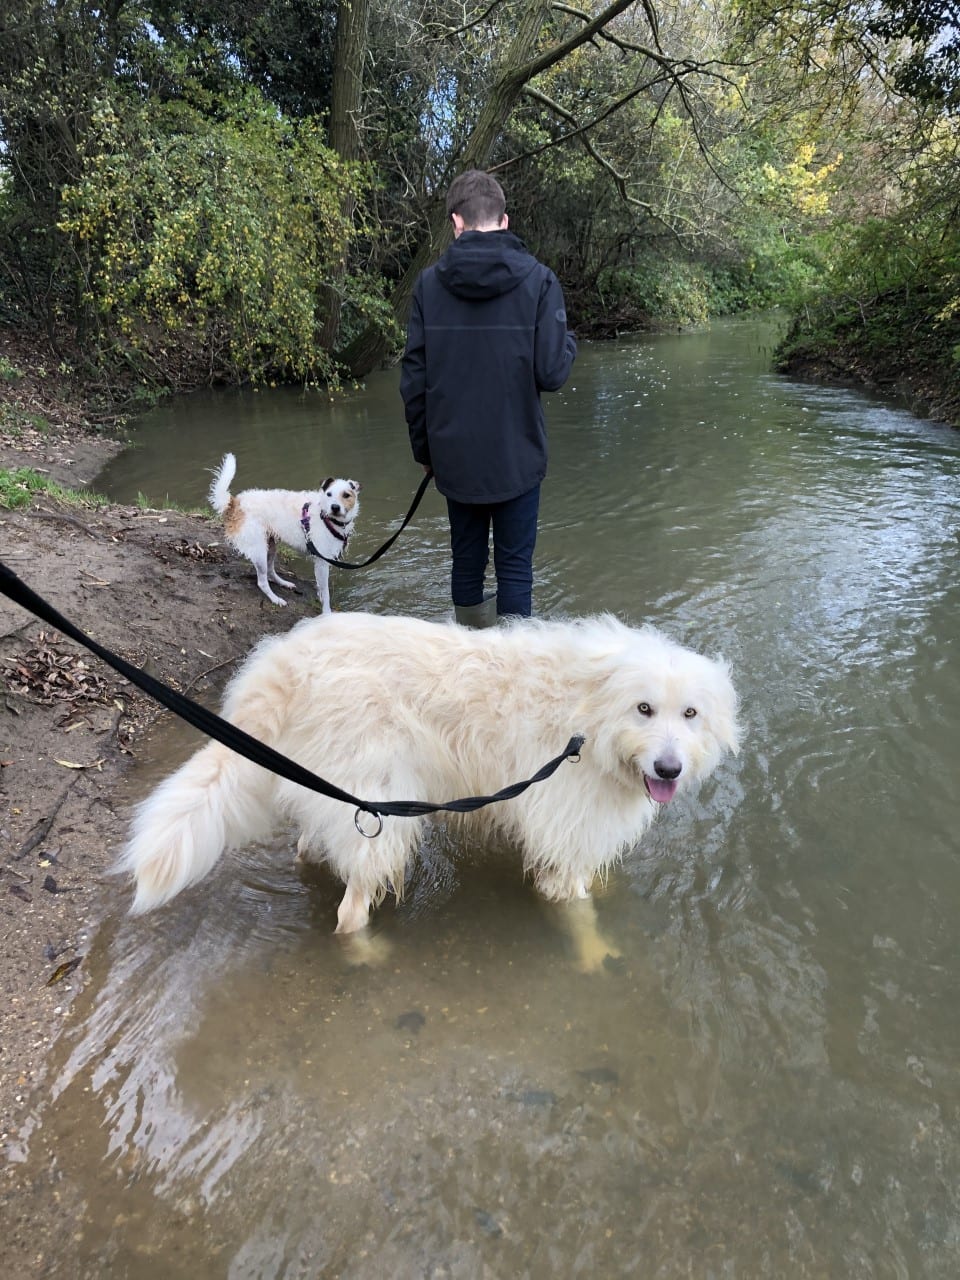 Baxter a Mioritic Romanian rescue dog and Rosie a Jack Russel paddling in a stream | 1 Dog At A Time Rescue UK